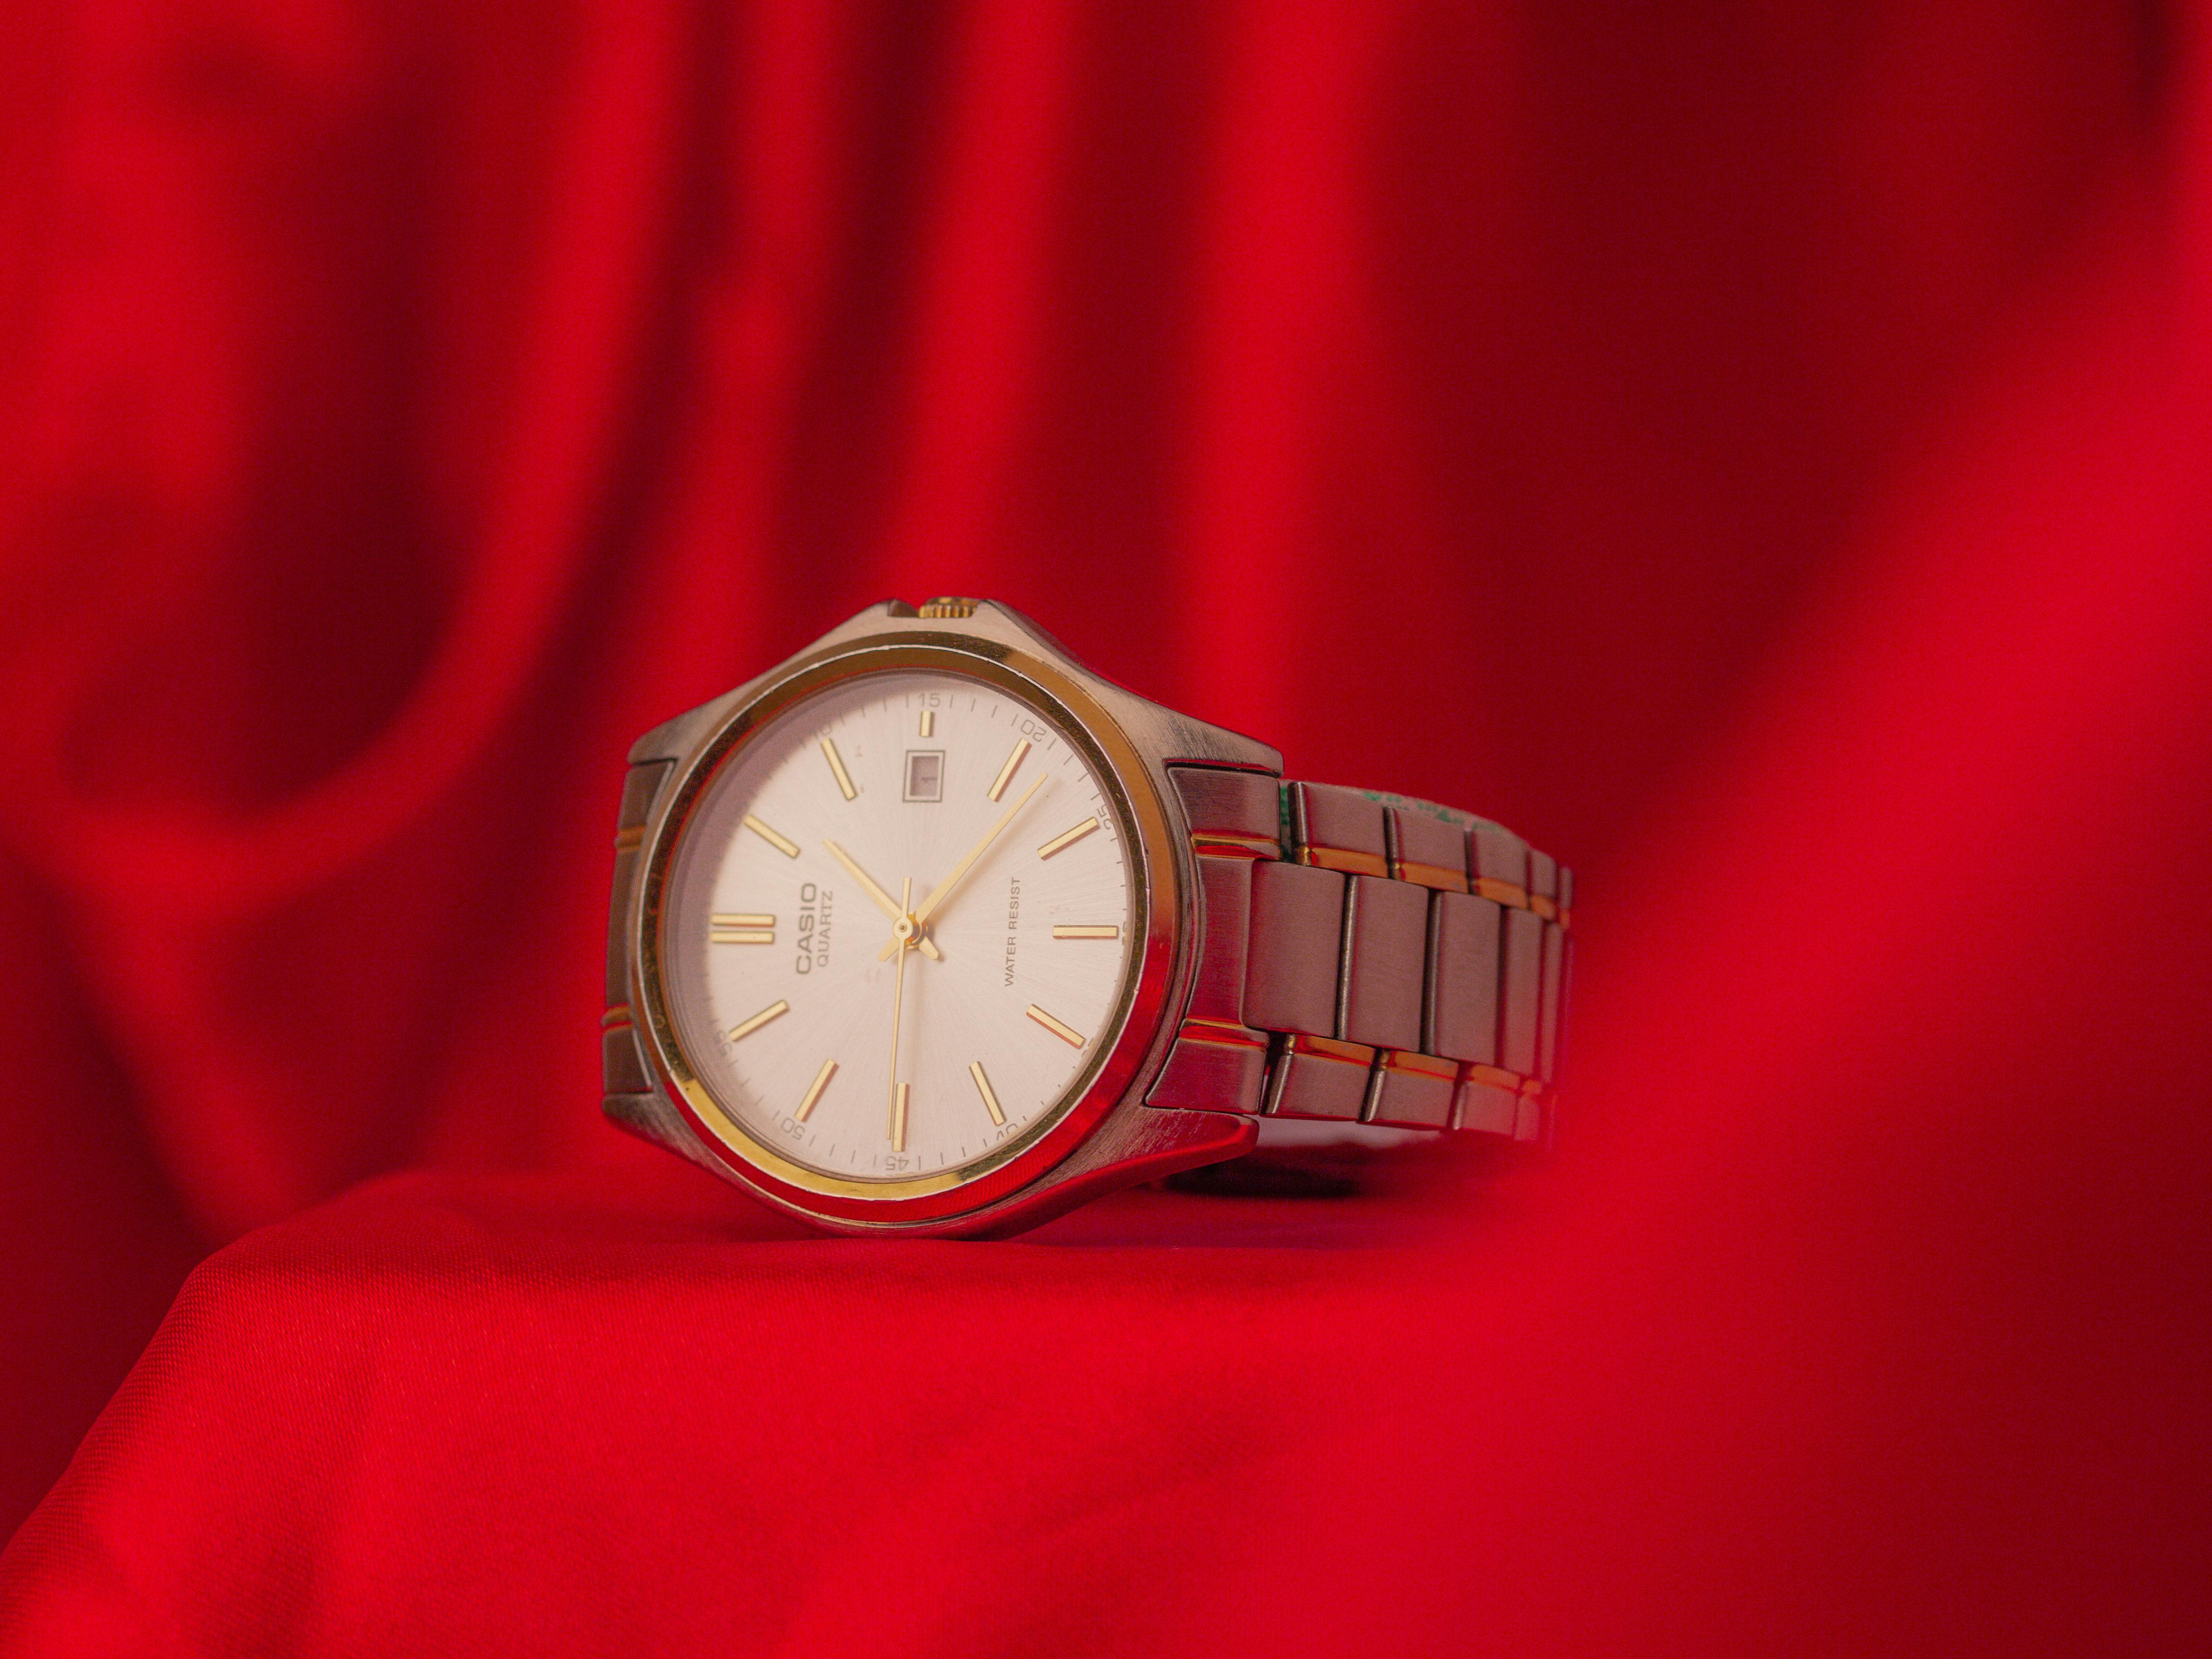 a silver watch with golden details on a red fabric